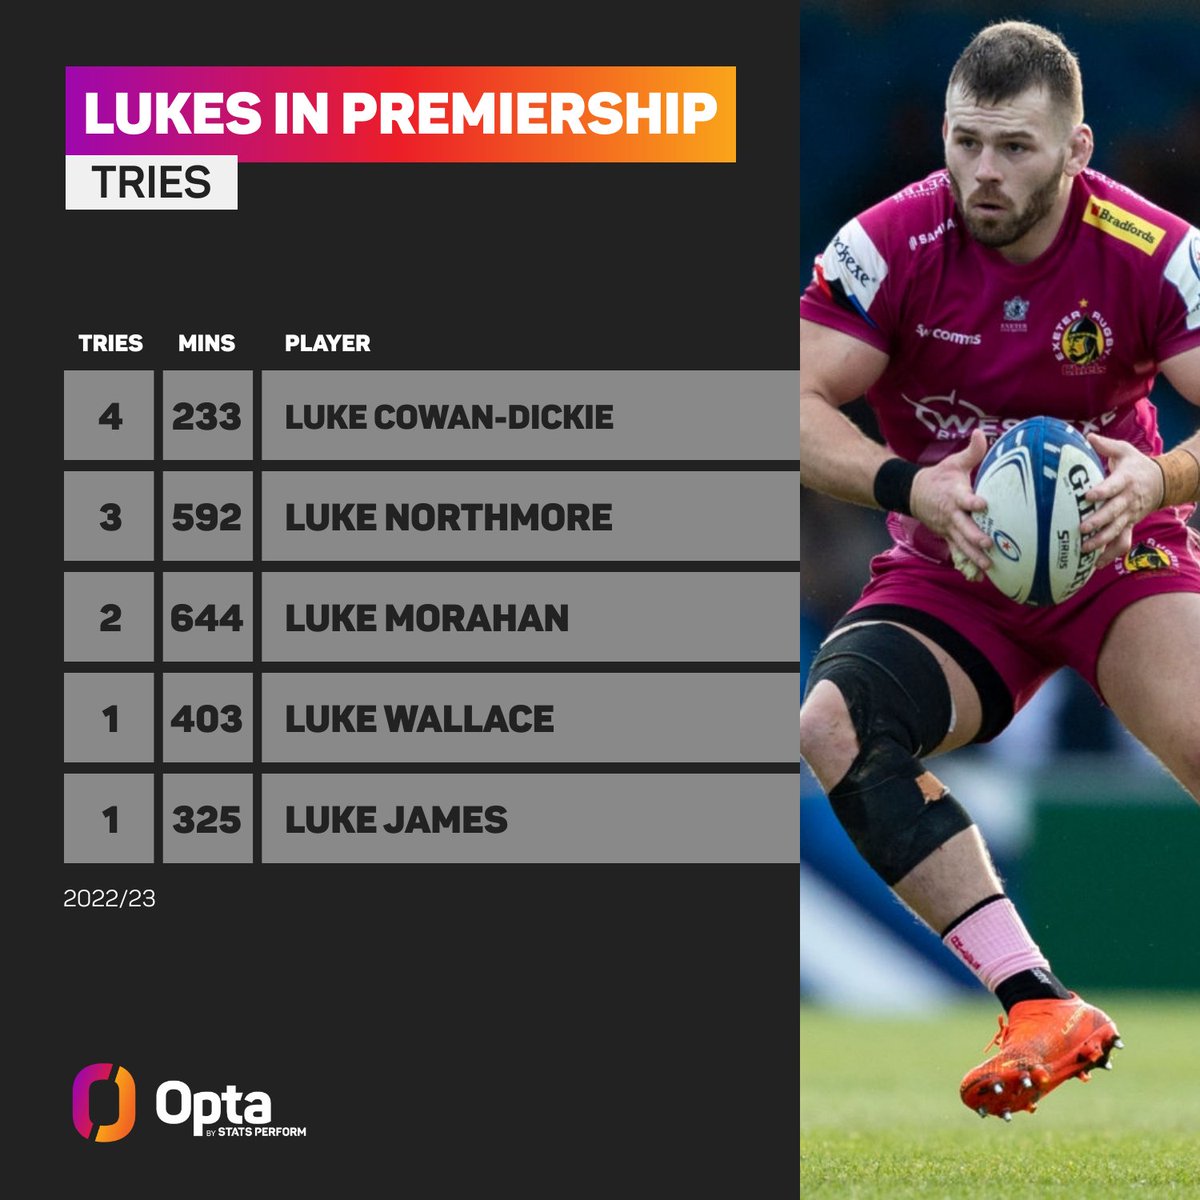 5 - All 5 Lukes in @premrugby this season have scored a try, there are 21 names with 5+ players called that, Luke is the only one where all of them have scored a try. Force. #MayThe4thBeWithYou #LukeSkywalker